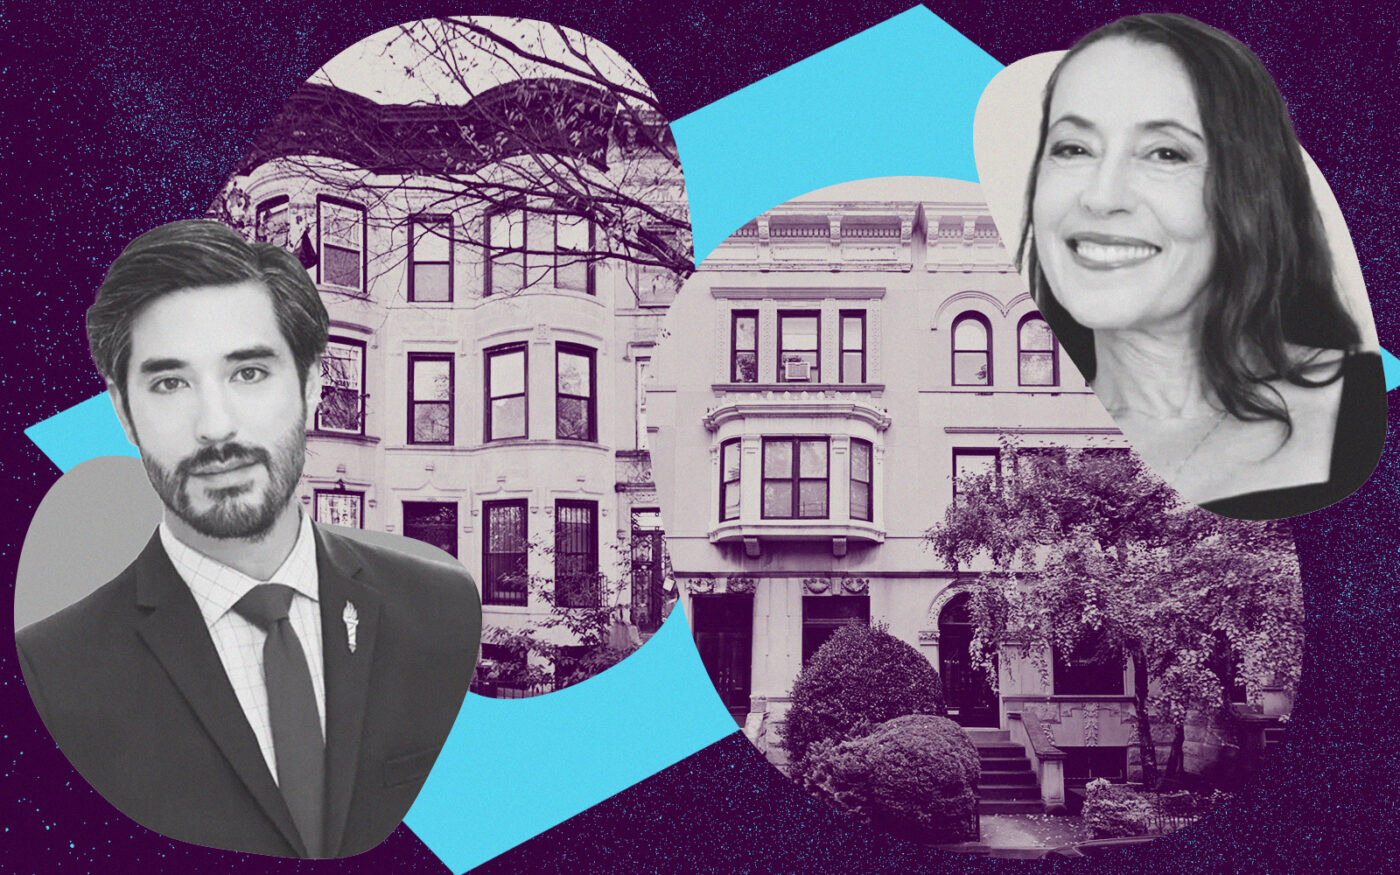 Park Slope townhouses Topped Brooklyn’s Luxury Market